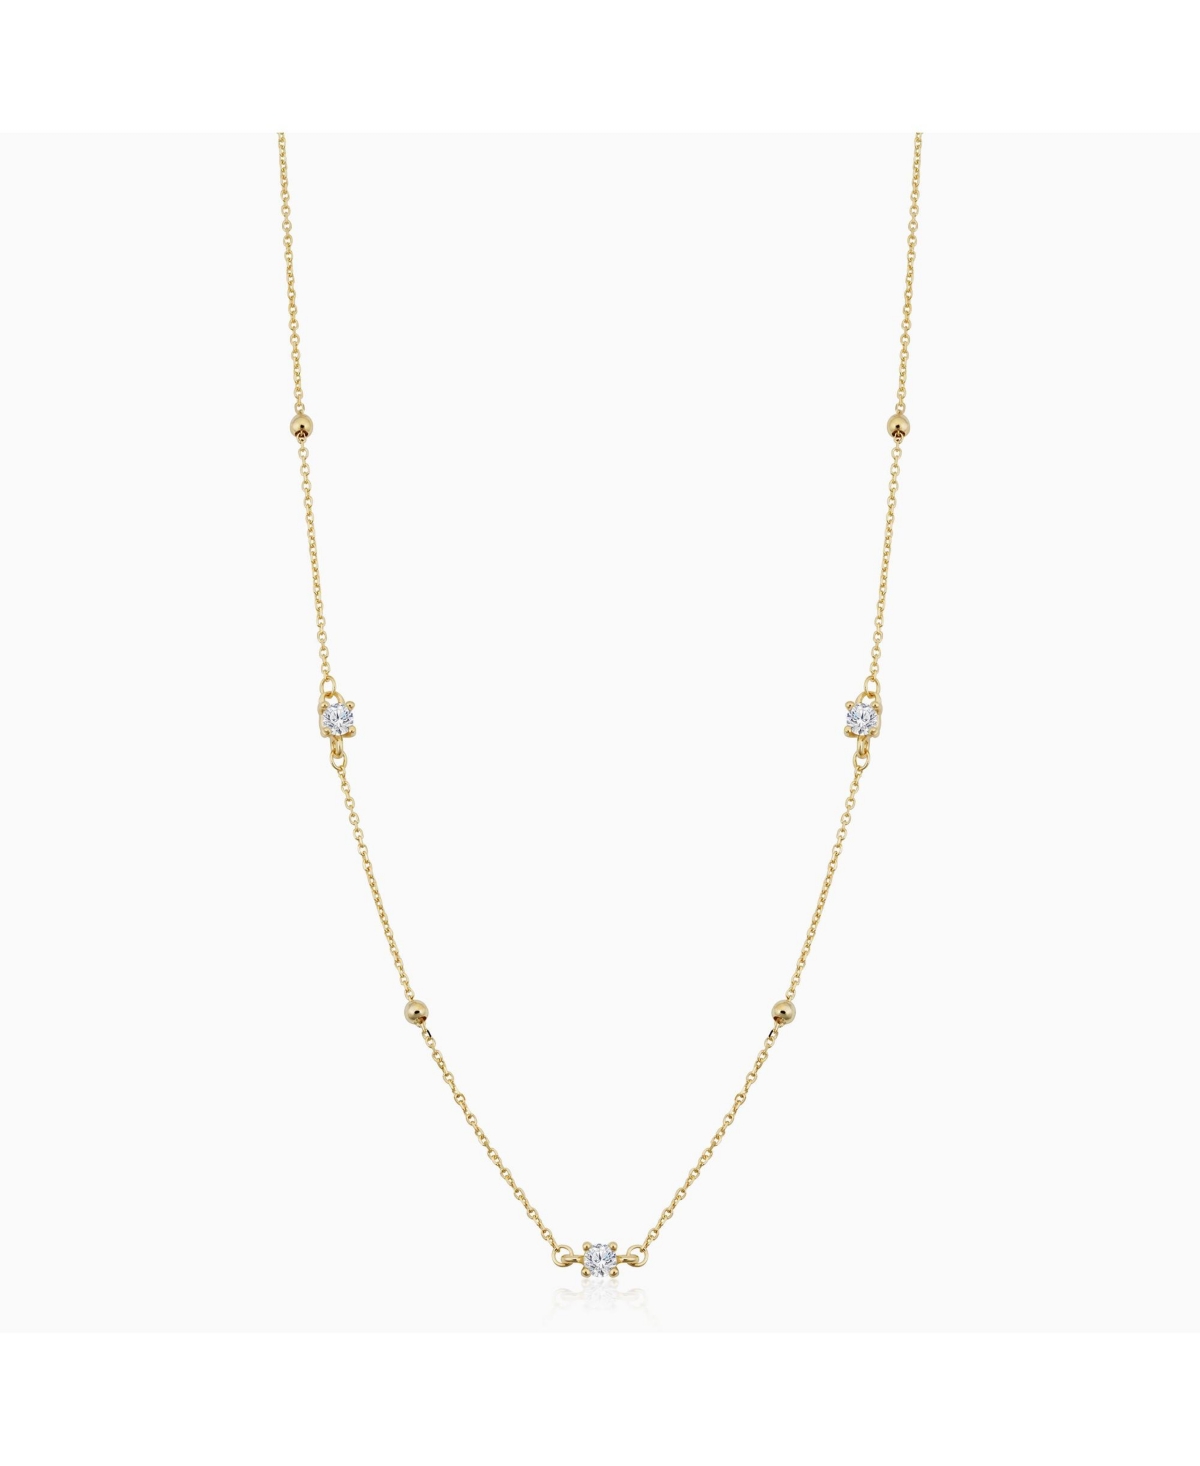 ORADINA SEEING SPARKS STATION NECKLACE 17-18" IN 14K YELLOW GOLD